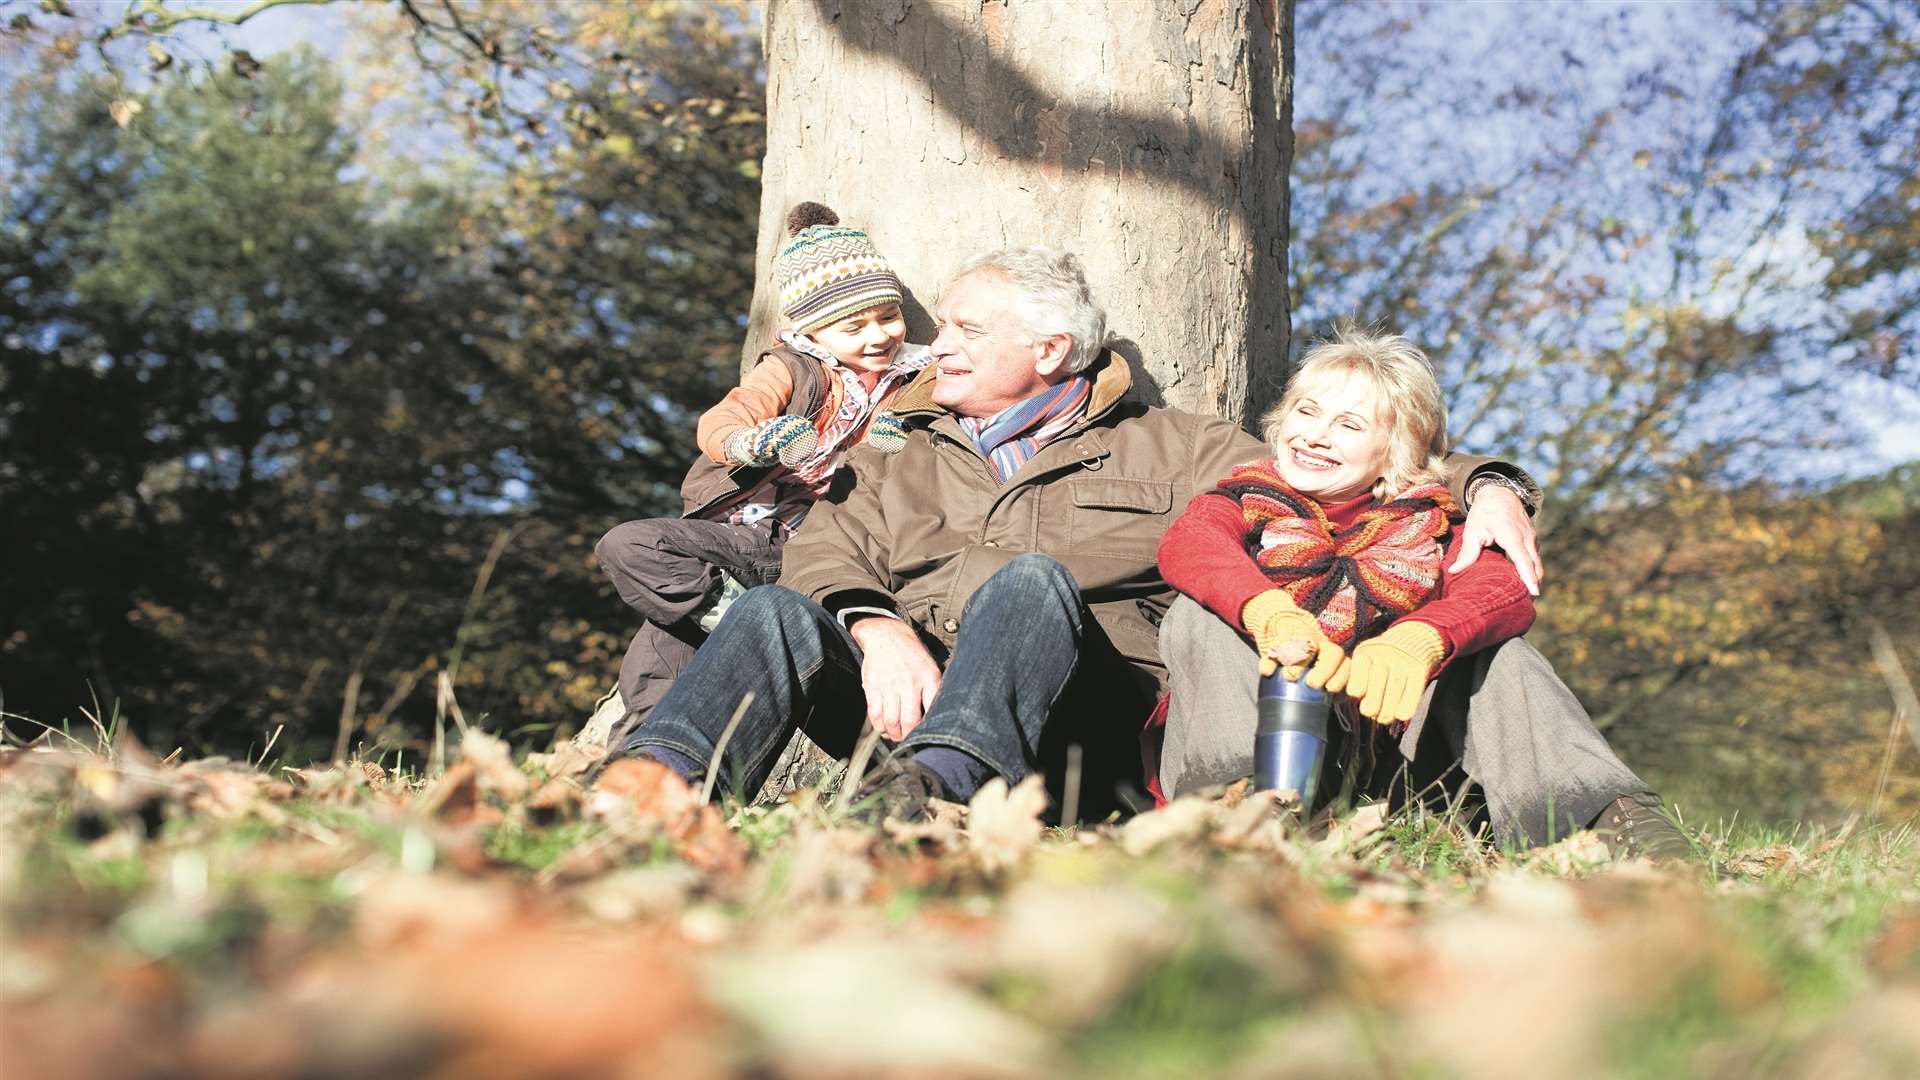 Try an autumnal walk with the family